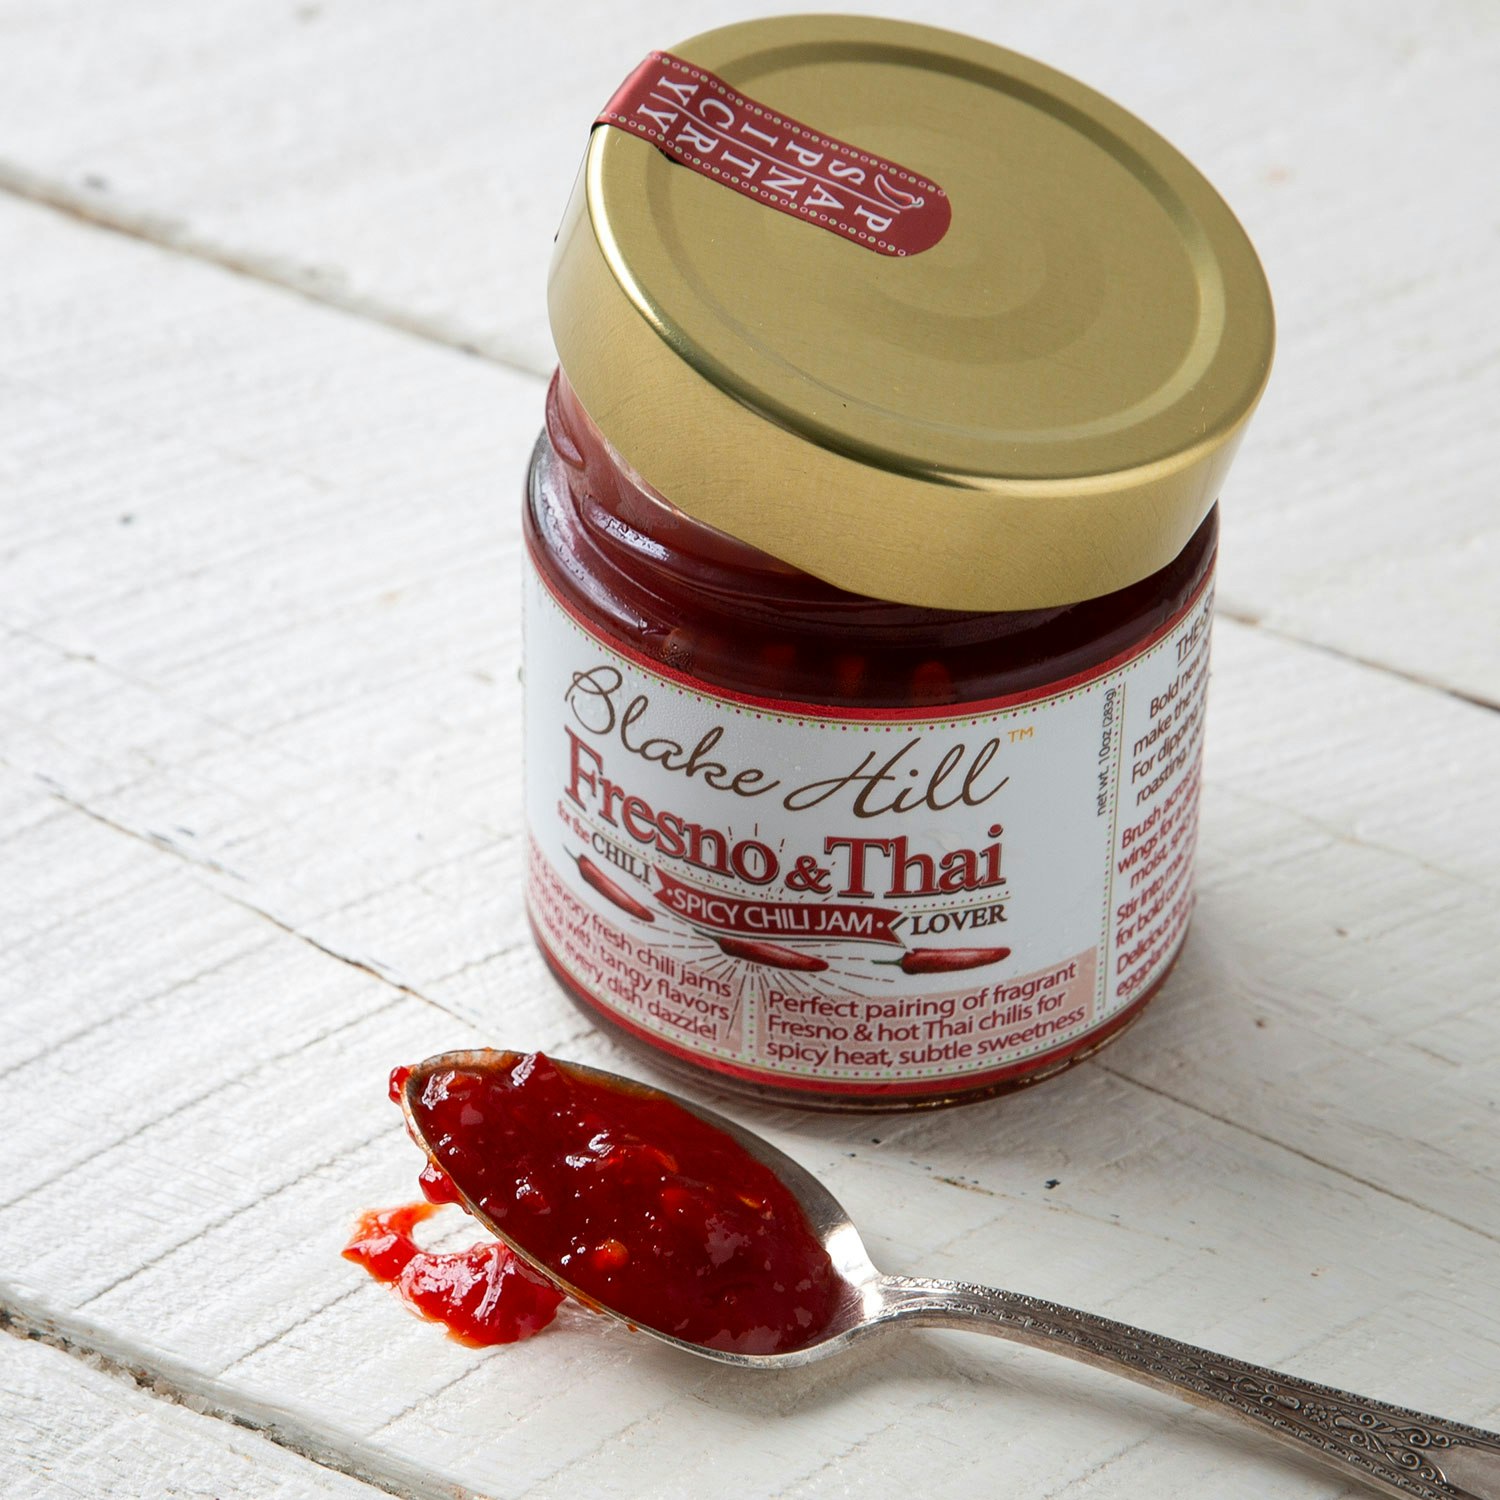 blake hill preserves fresno and thai chili jam specialty foods